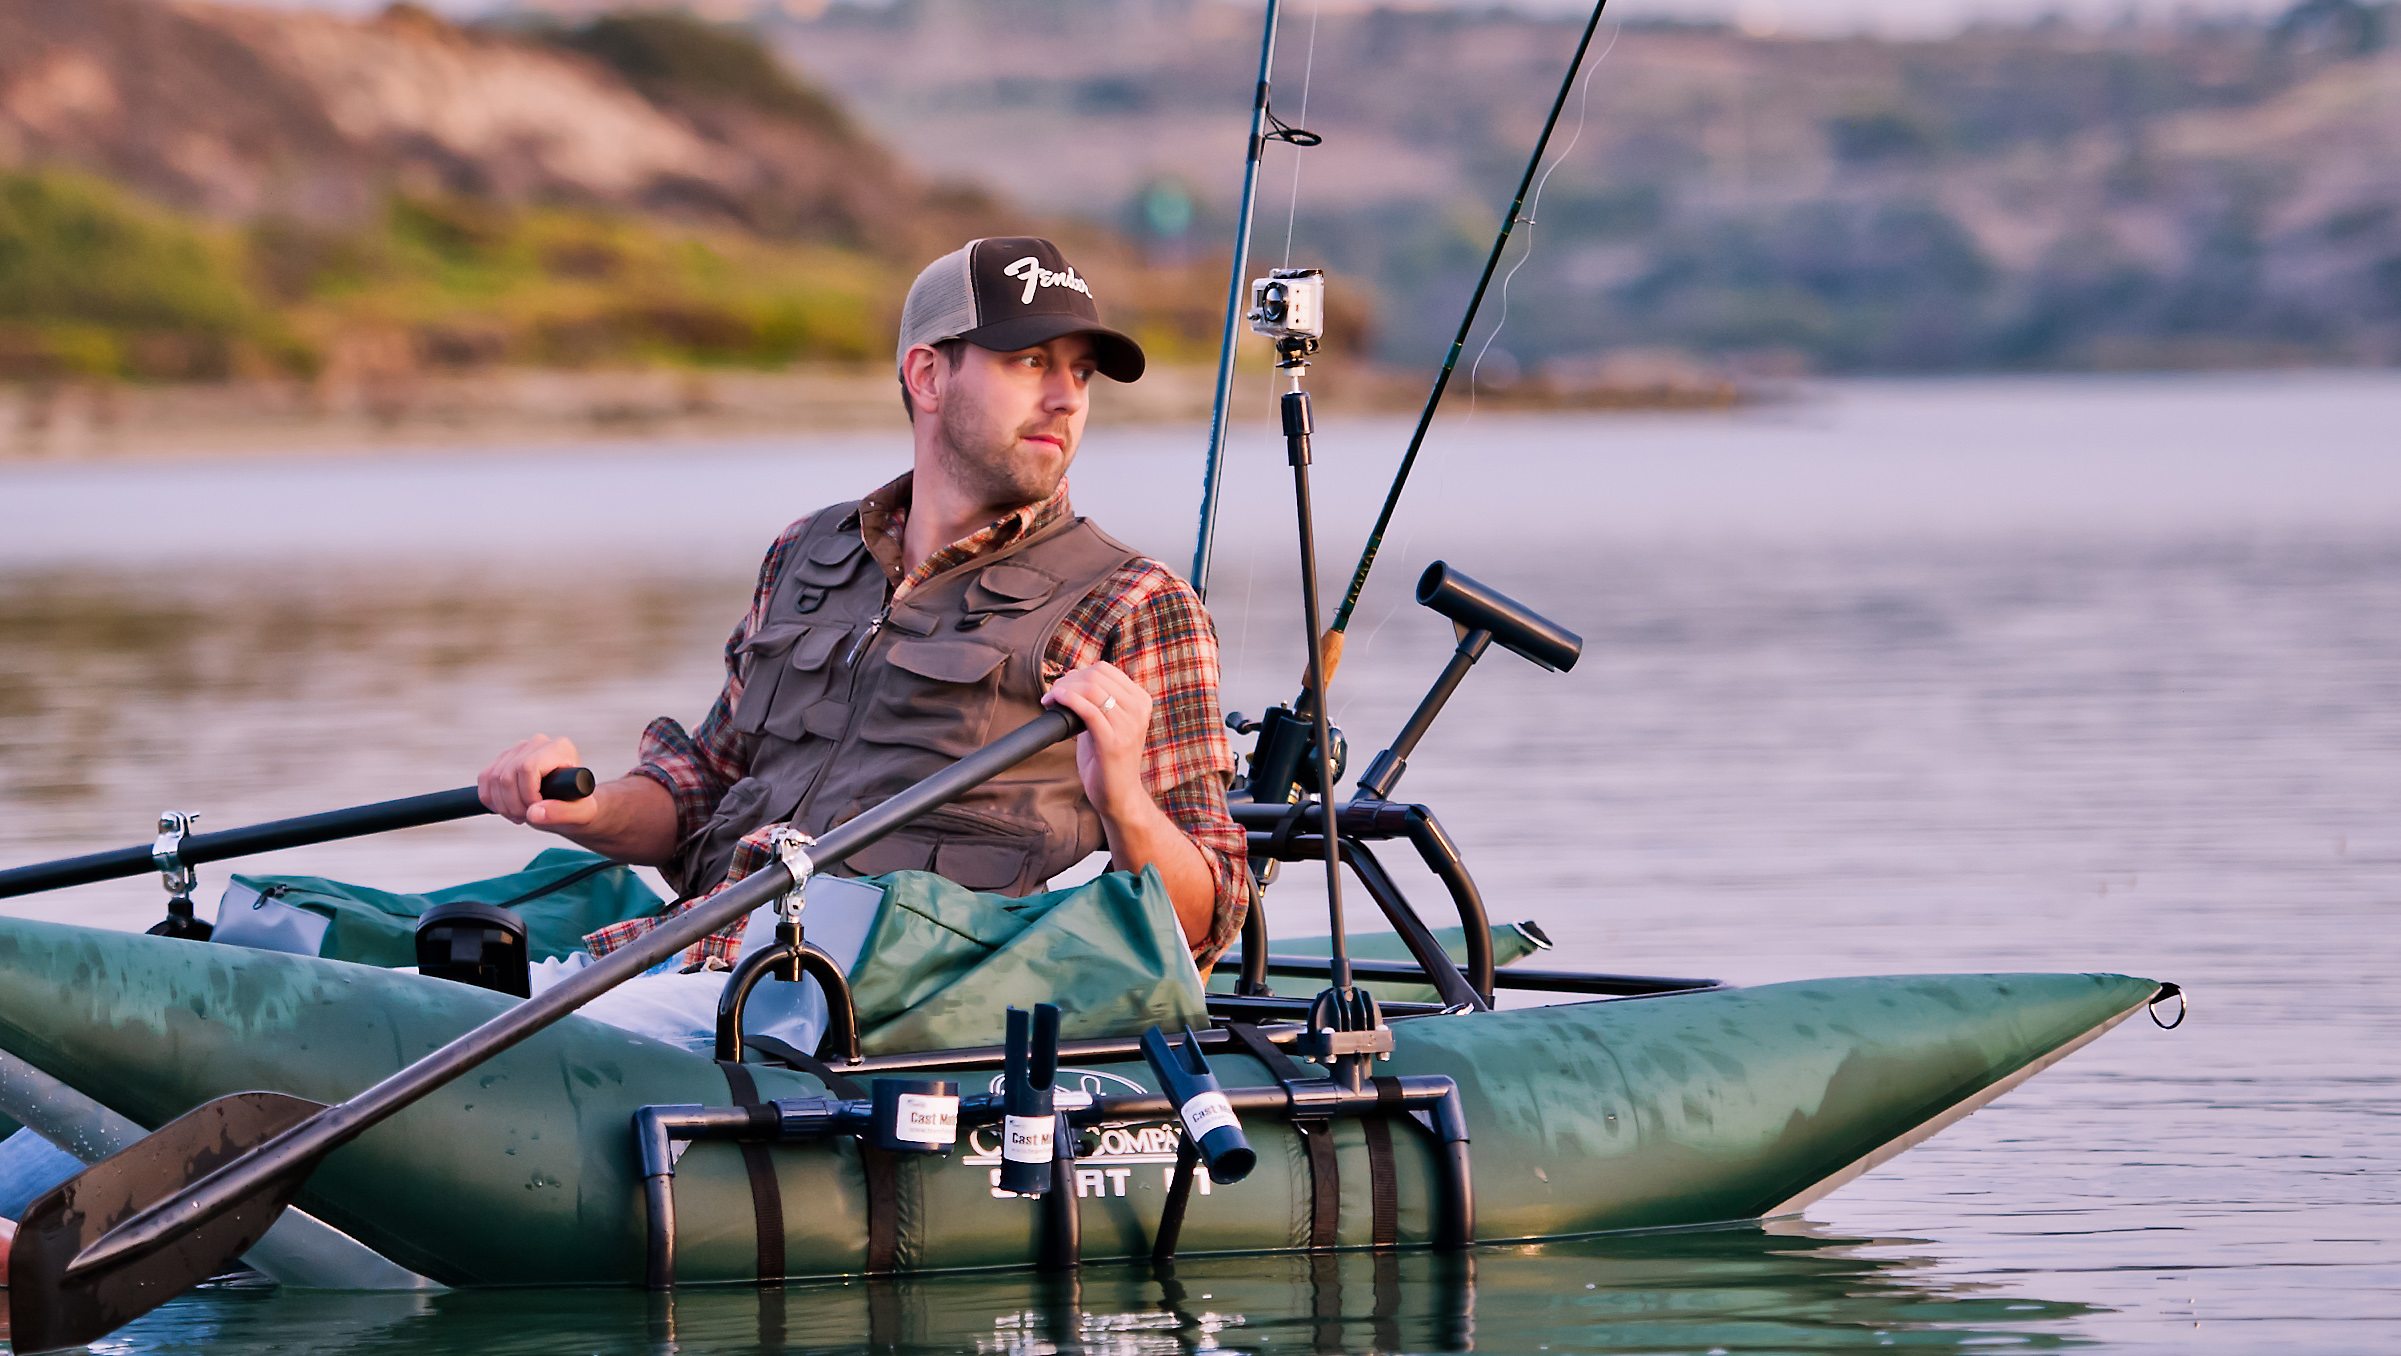 CastMate and CastMate Pro Allow for Convenient, Secure Float Tube Mounting  of Rod Holders, Fishfinders, Cup Holders, and More